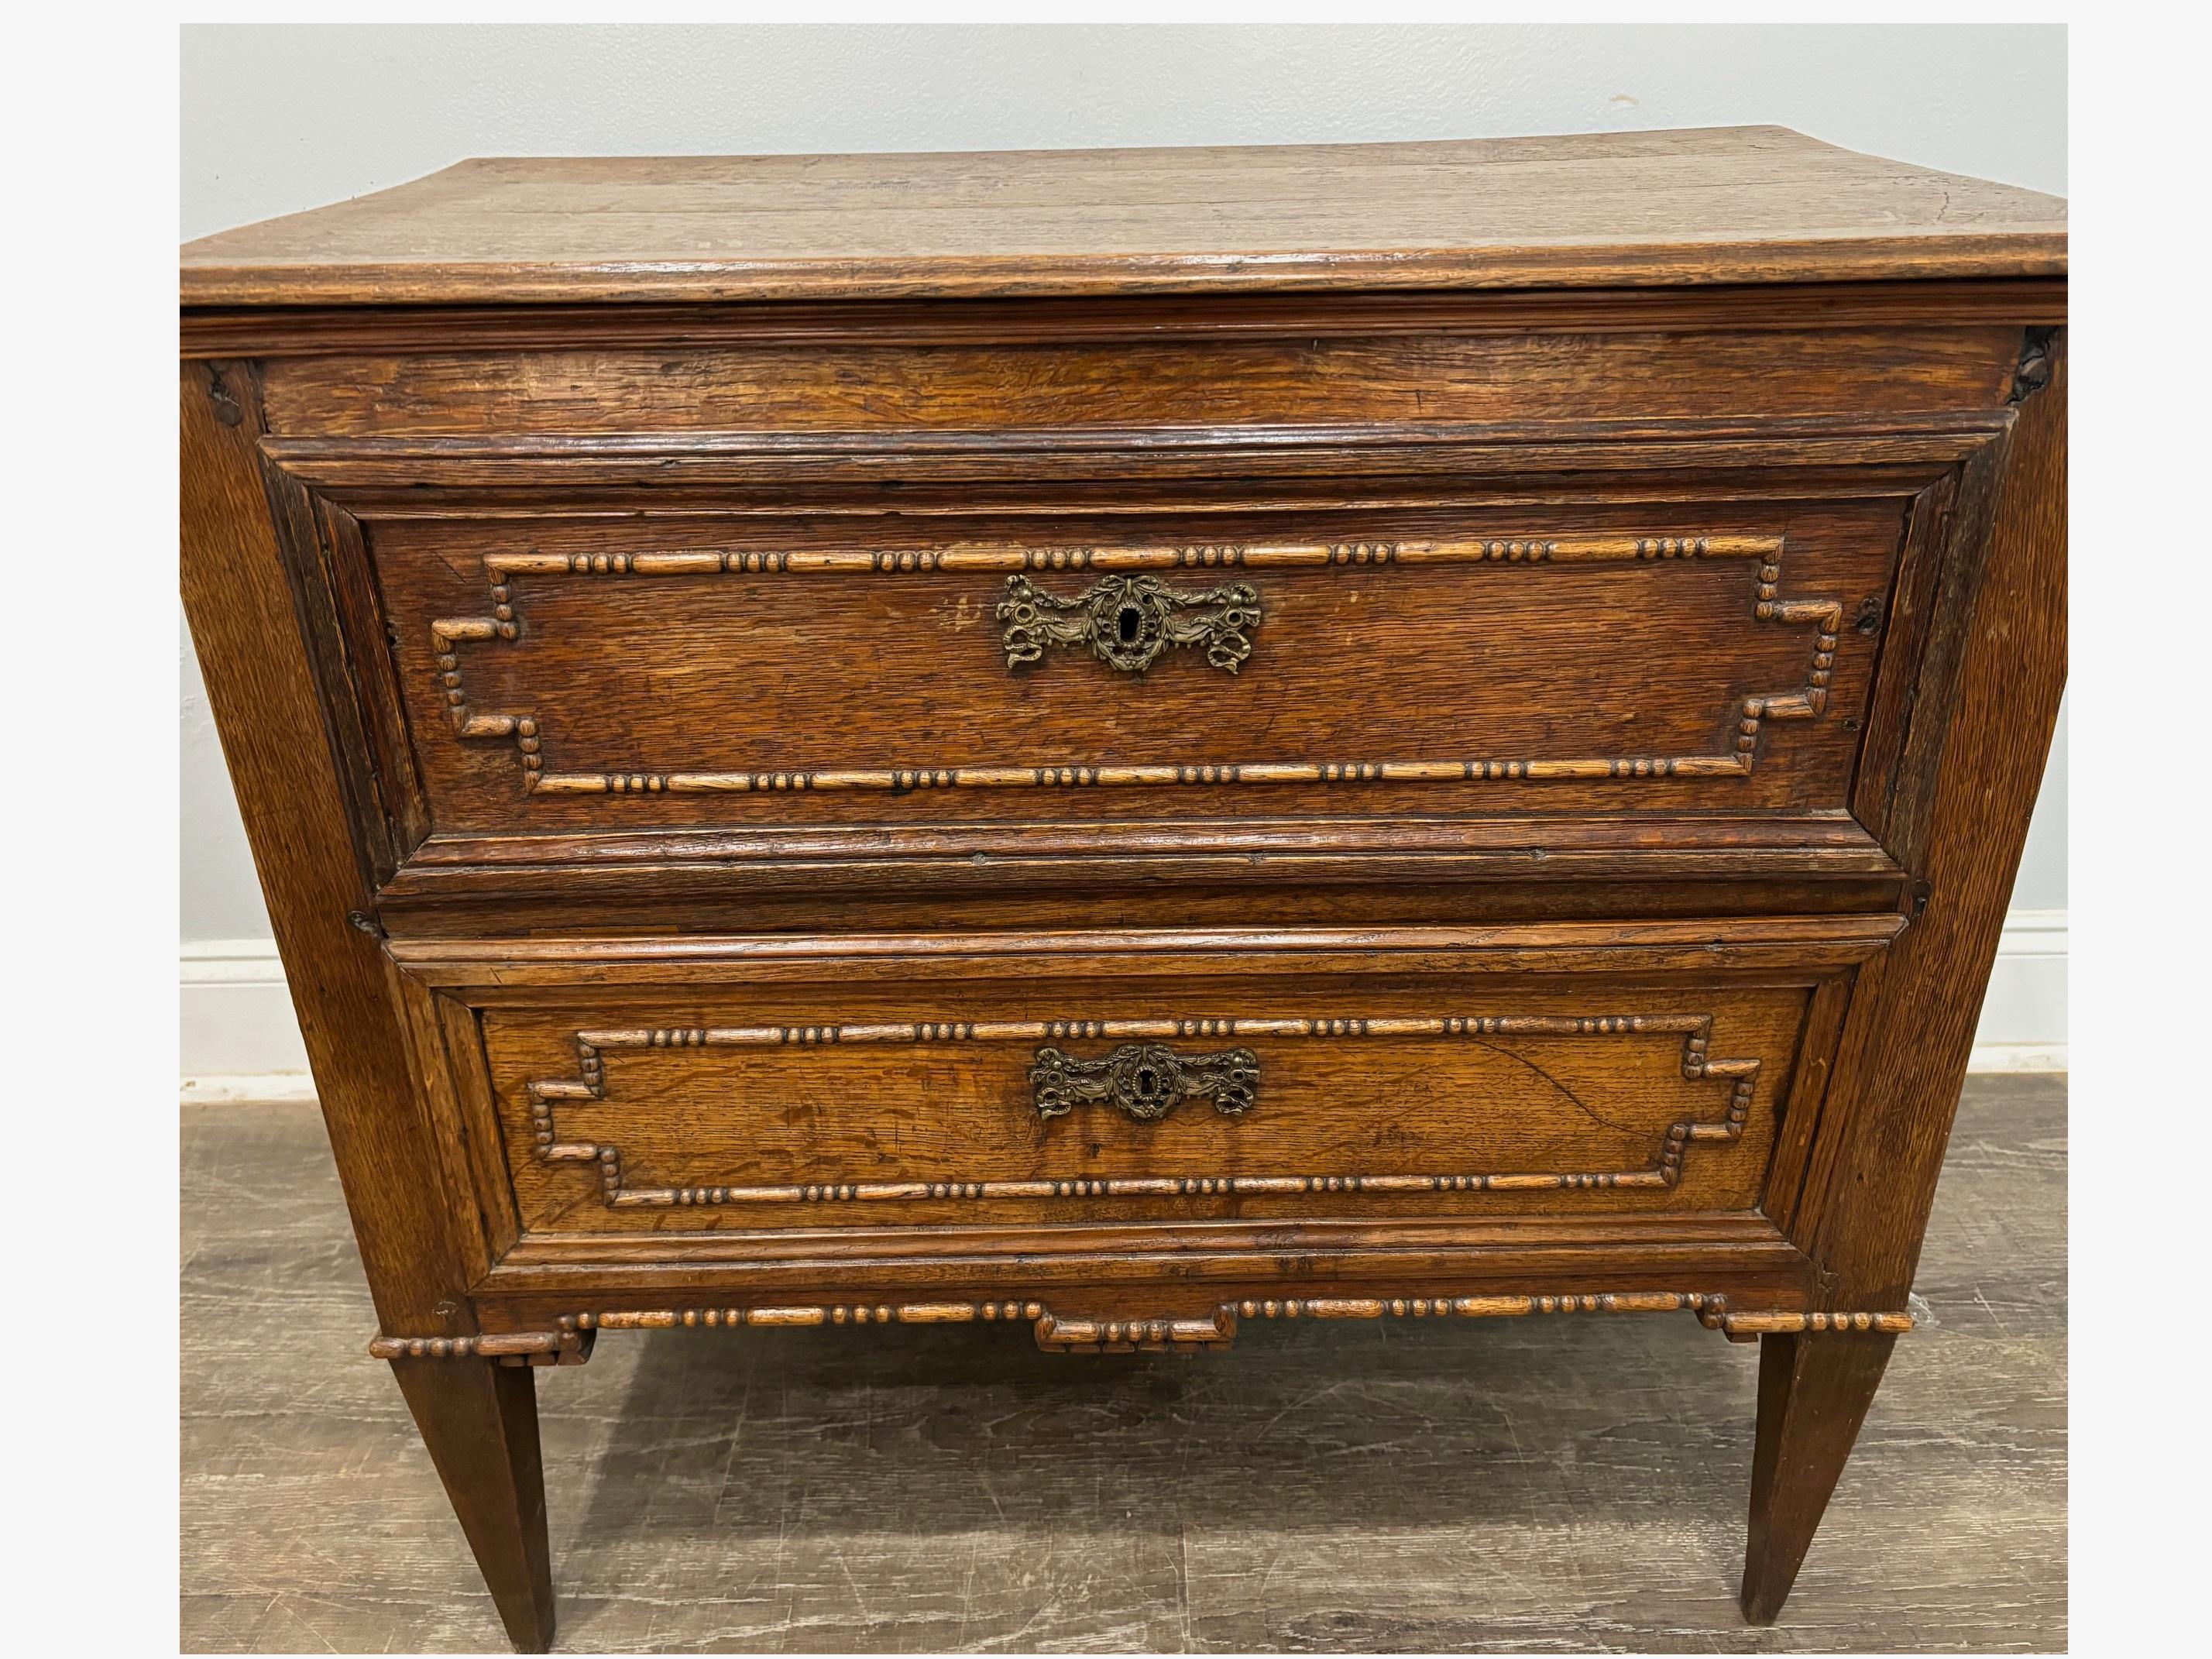 This chest is made of oak and is nicely carved. It wears a mixture of dressy and rustic.